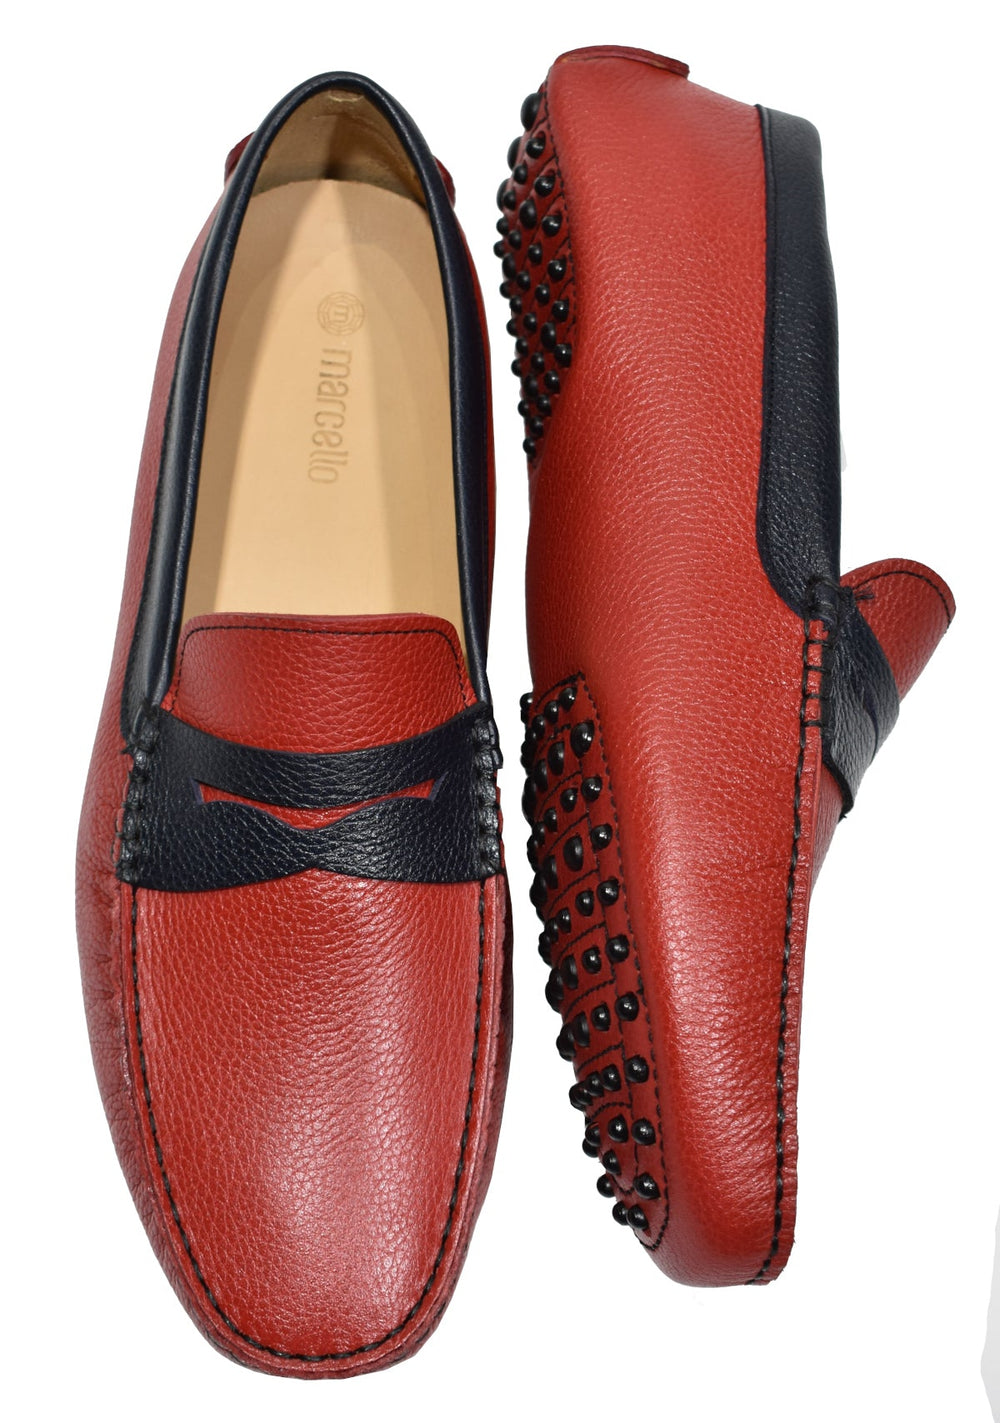 Take your look to the next level with the stylish S134 Red Driver shoes. Handcrafted in Spain with luxe red leather, navy leather trim and cool gommini soles, these shoes make a fashionable impression with their classic fit and comfortable foot bed. Perfect for any occasion. A great look with jeans or shorts.  Classic fit.